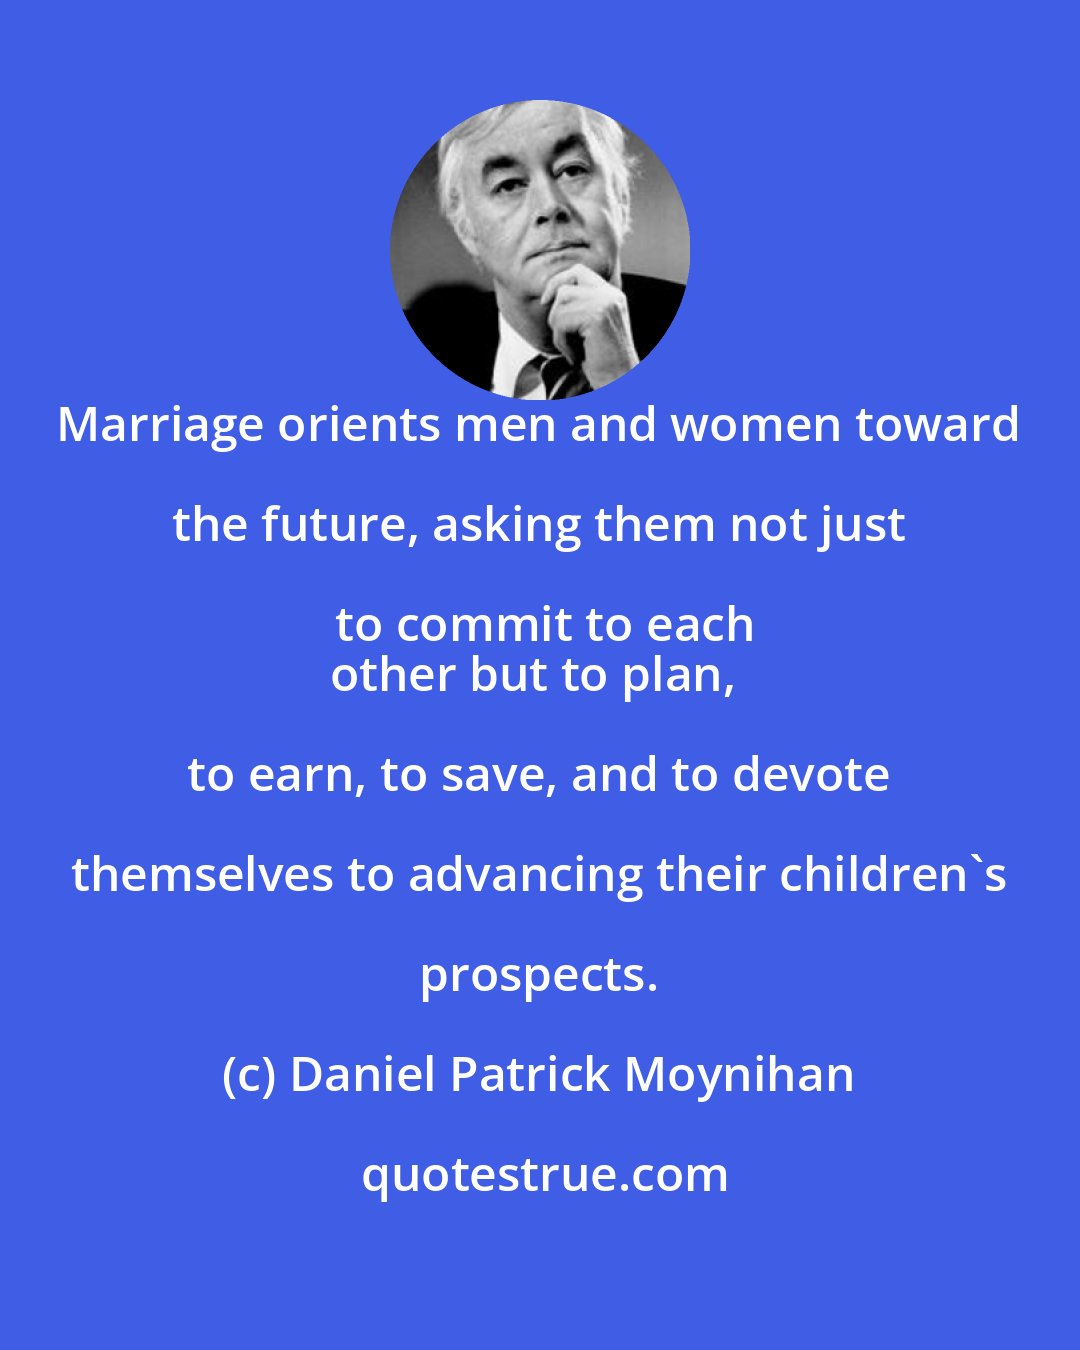 Daniel Patrick Moynihan: Marriage orients men and women toward the future, asking them not just to commit to each
other but to plan, to earn, to save, and to devote themselves to advancing their children's prospects.